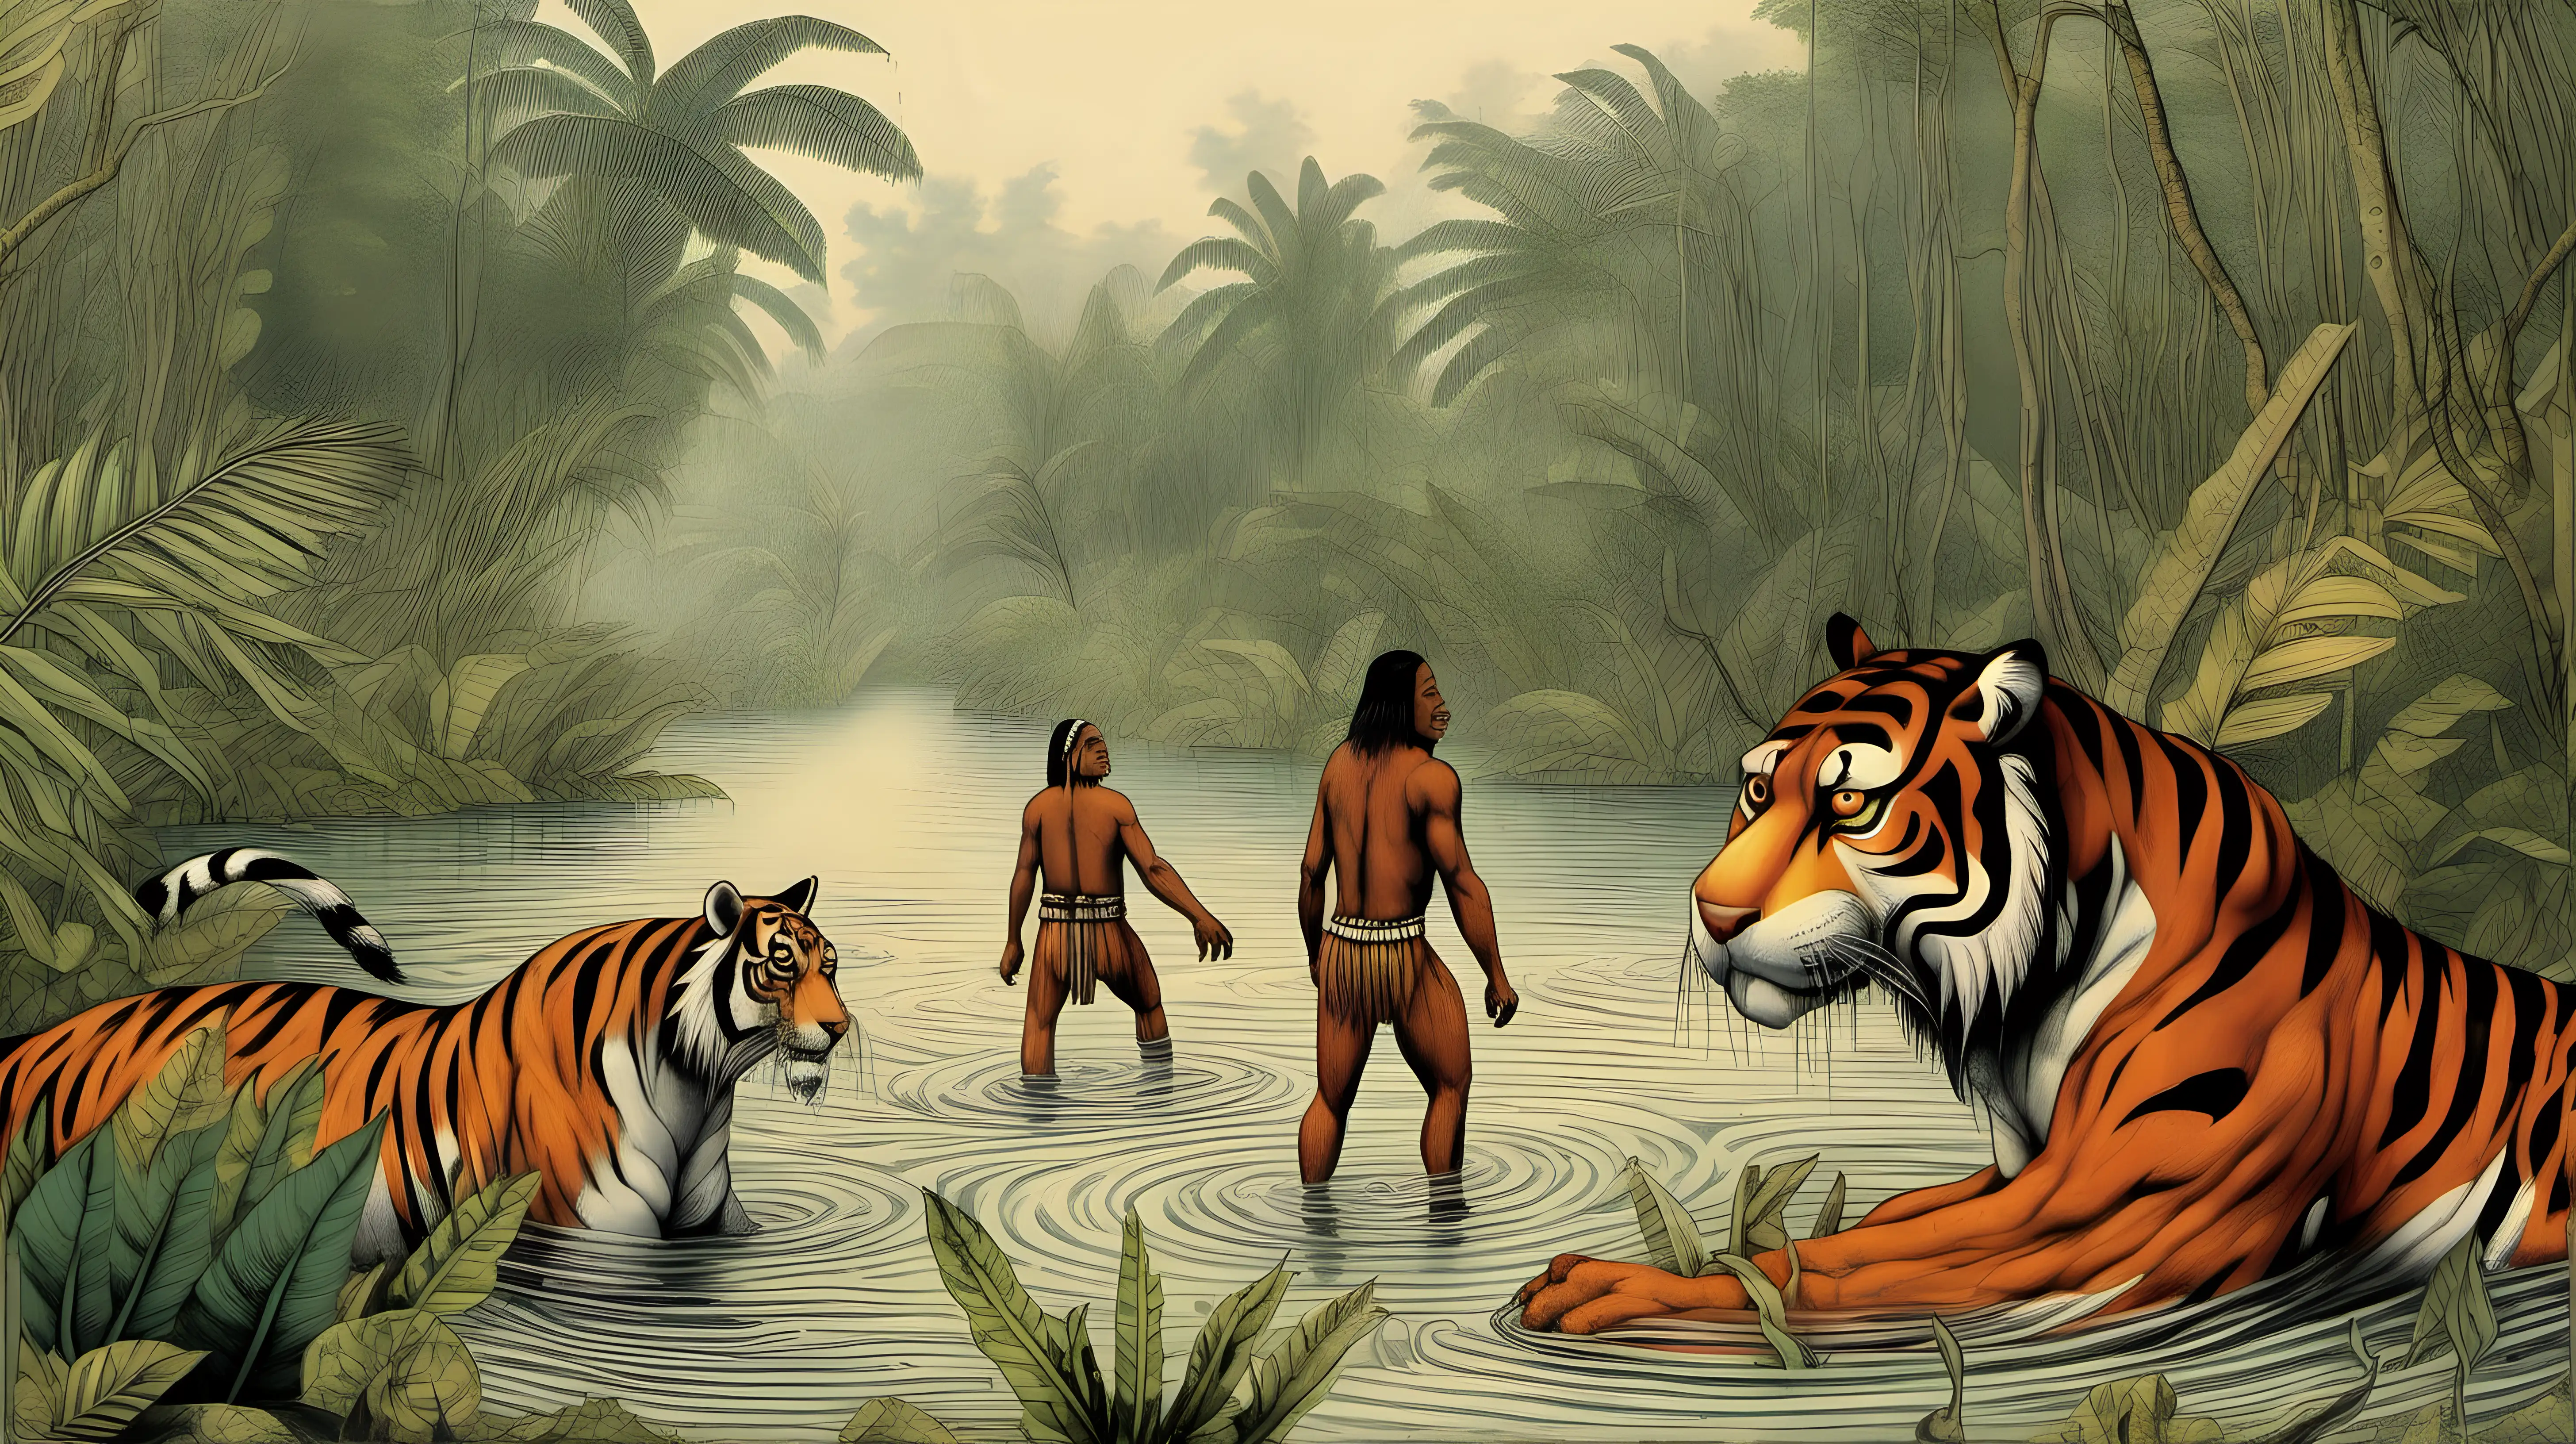 in the Amazon river speaking with an indigenous shaman who is part tiger and part human. More tigers swim in the river behind them. It is raining and the scene is very humid, they're surrounded by wet jungle. In the style of theodore de bry without any text captions.